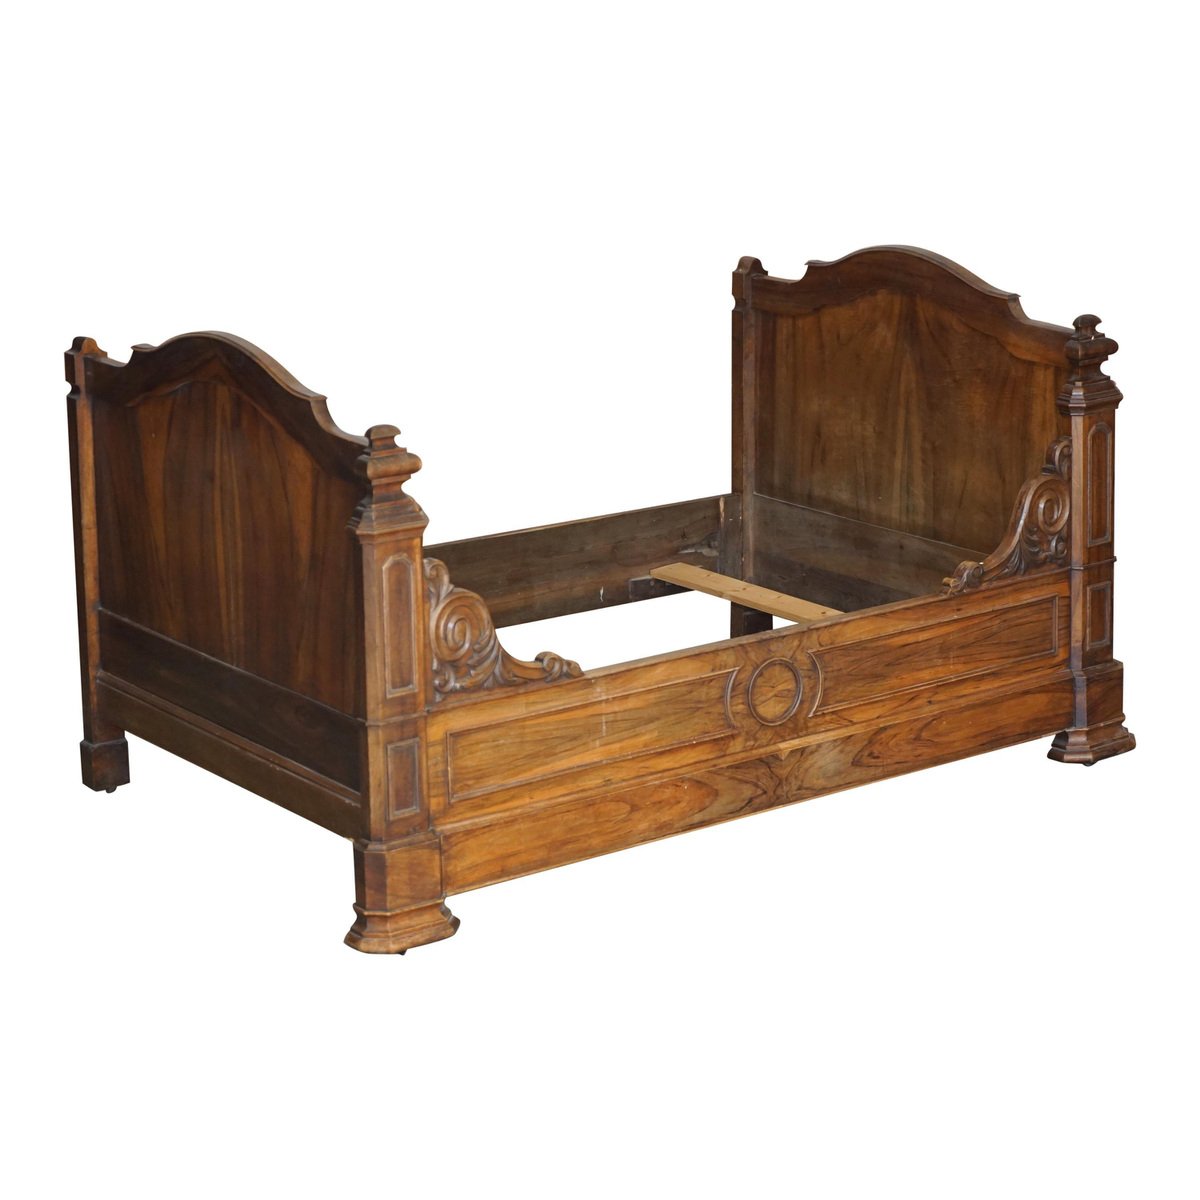 antique french louis philippe alcove daybed frame in hardwood 1830s GZP-1006396